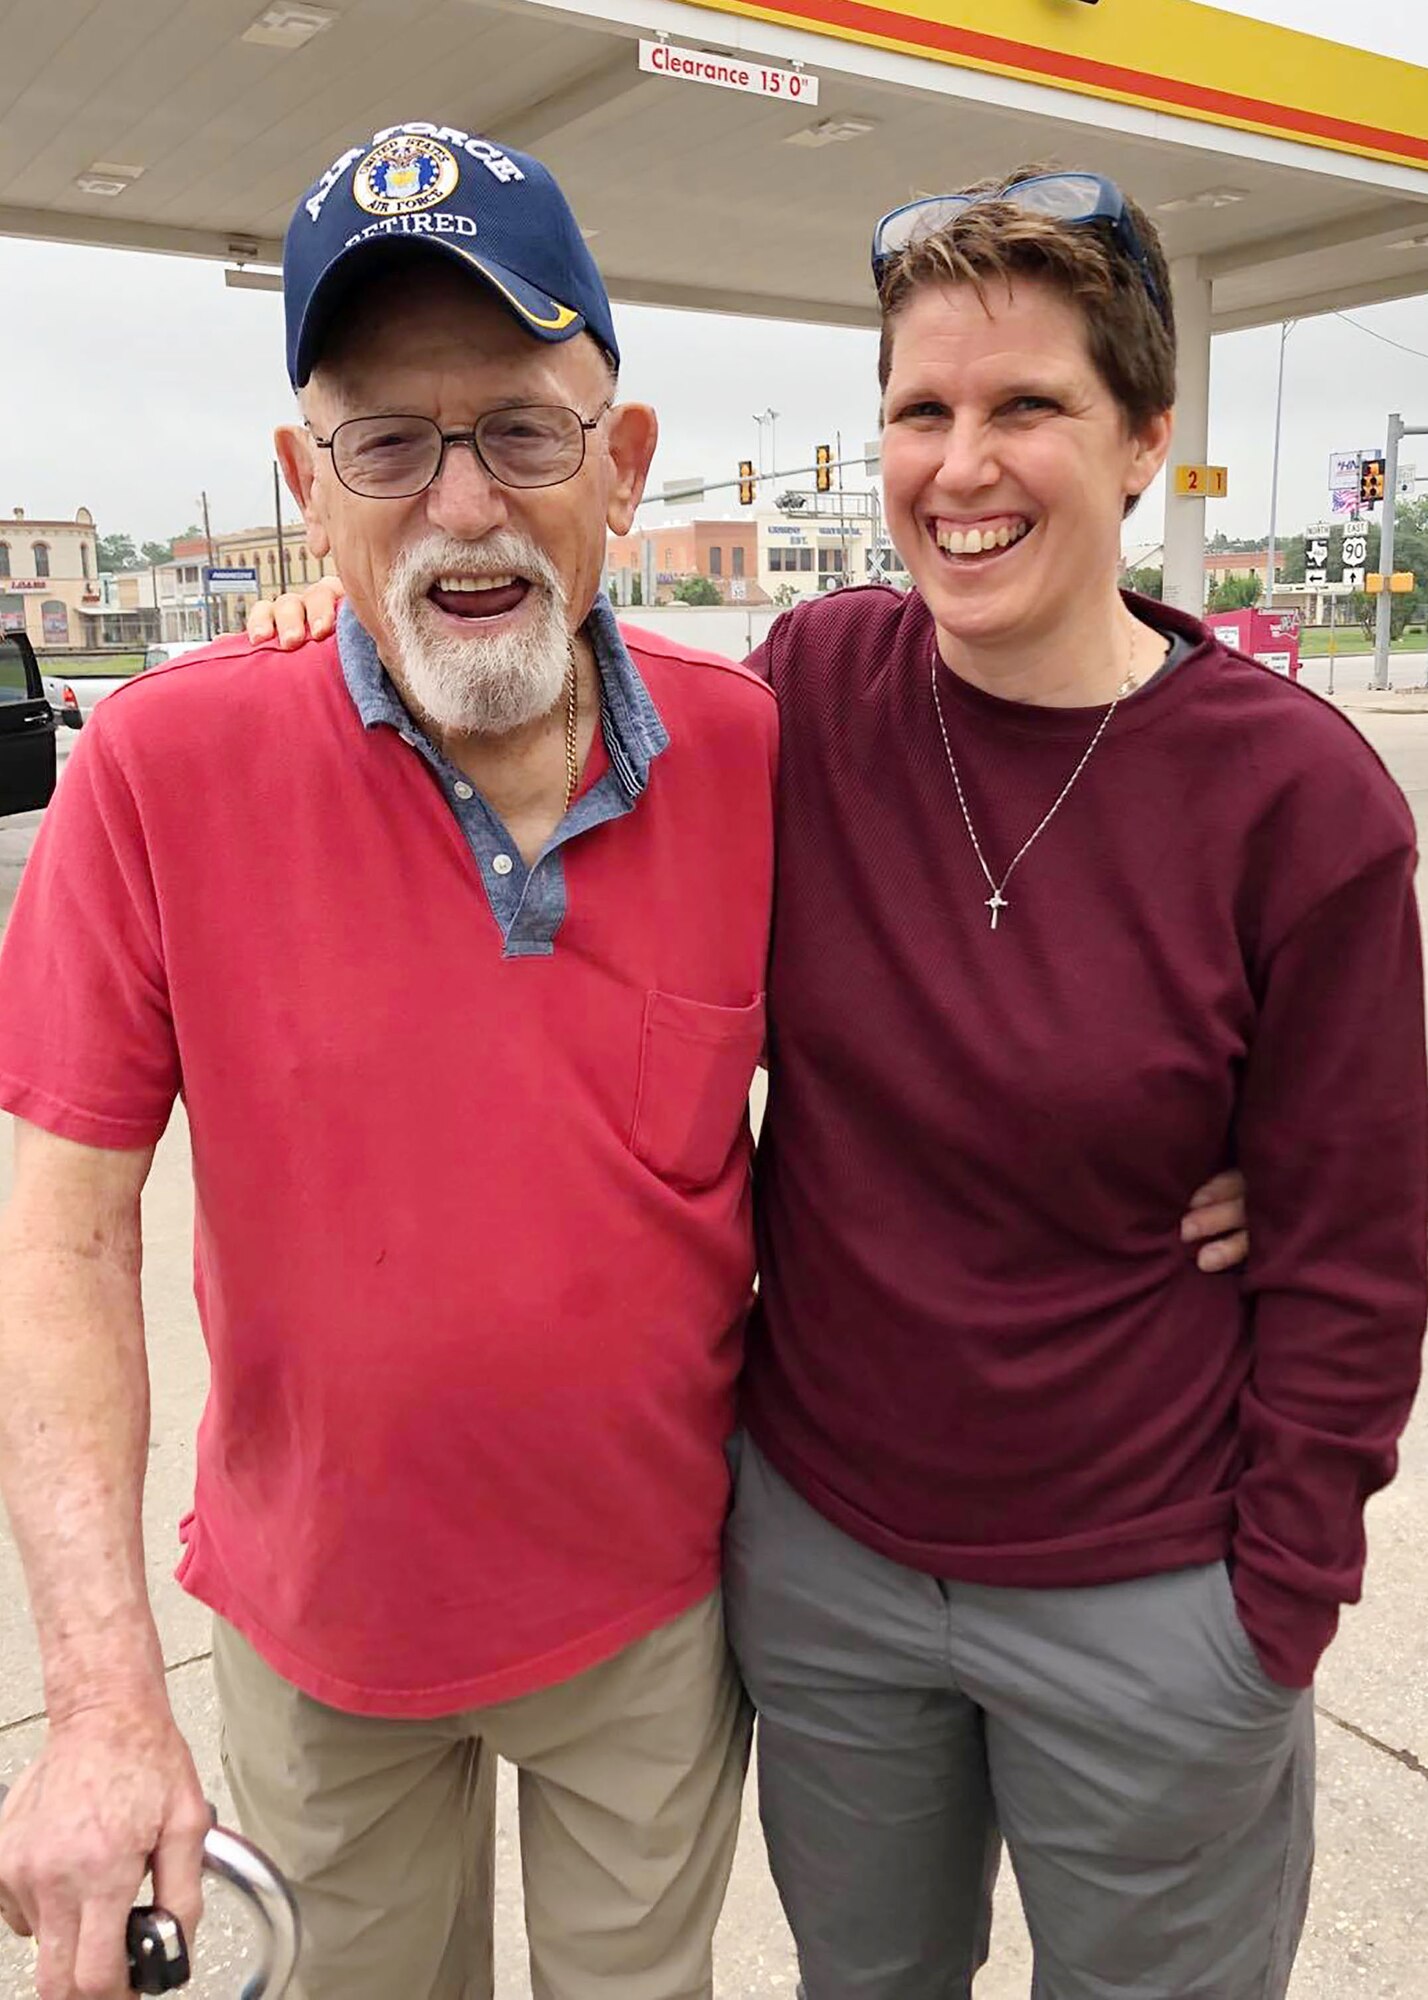 Colonel Michelle Estes, 352nd Special Operations Maintenance Group commander, poses for a photo with retired Senior Master Sgt. Edward Sanders in Texas, May 2019. Sanders was her Air Force Junior Reserve Officers' Training Corps instructor when she was in high school, and Estes said he is one of her greatest mentors. (Courtesy photo)